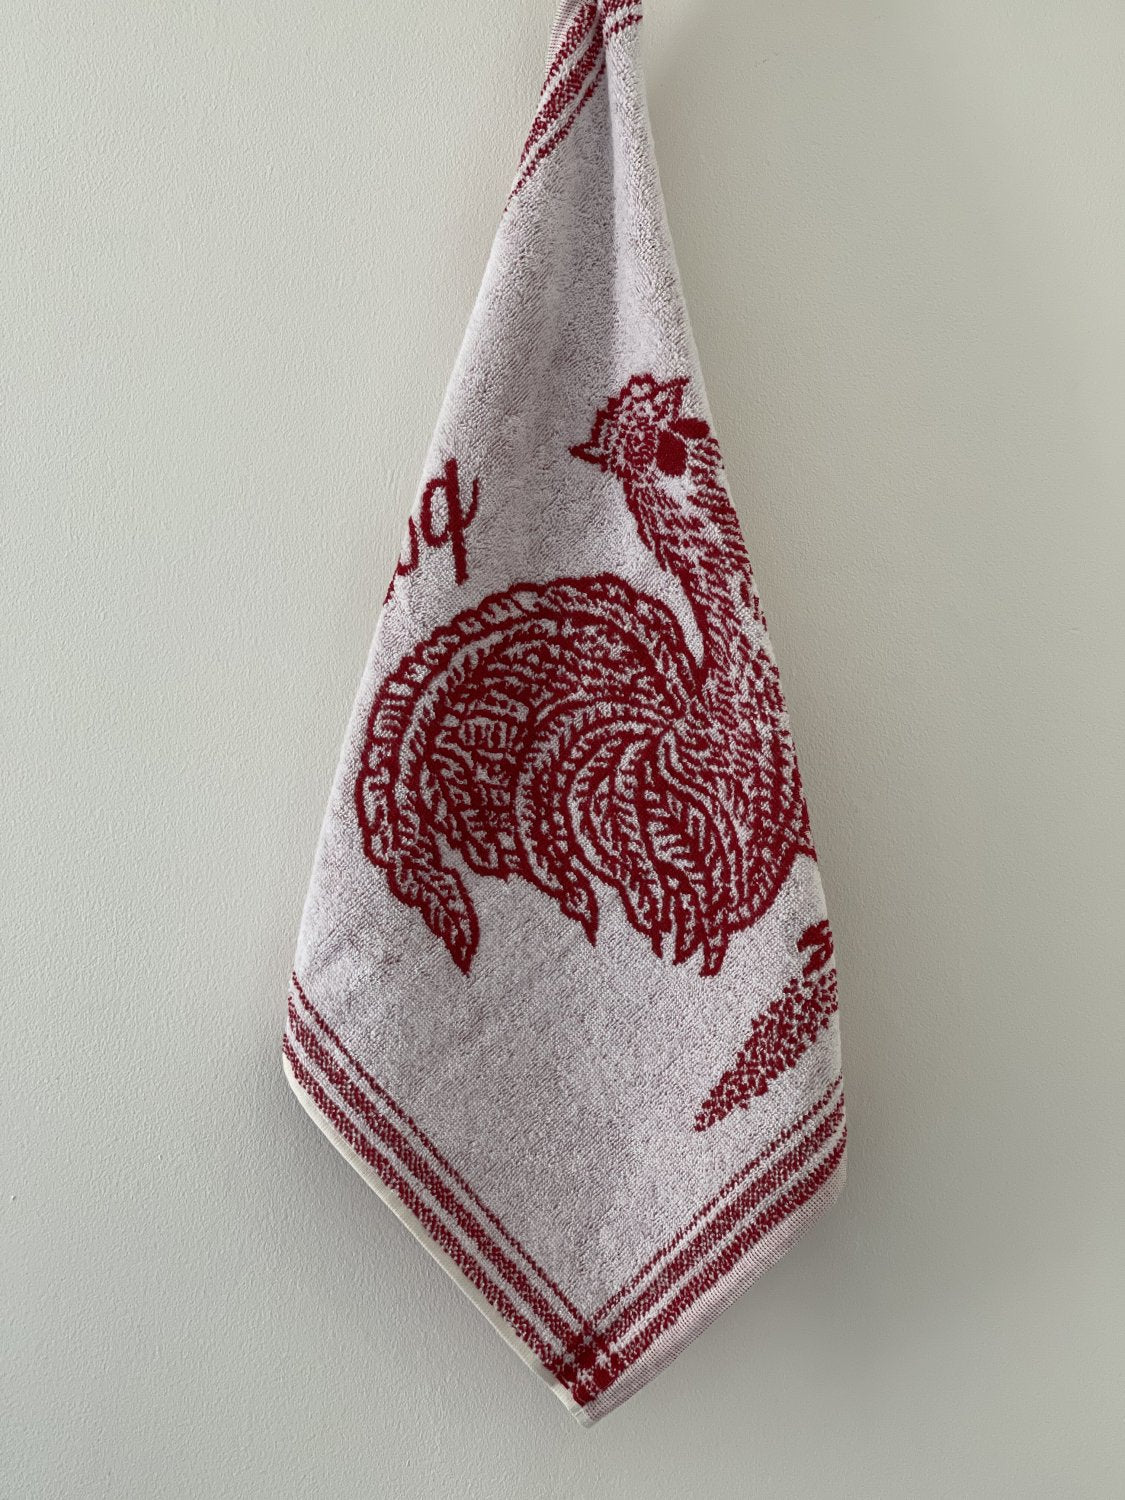 Coucke "Le Coq", Cotton terry hand towel. Designed in France.